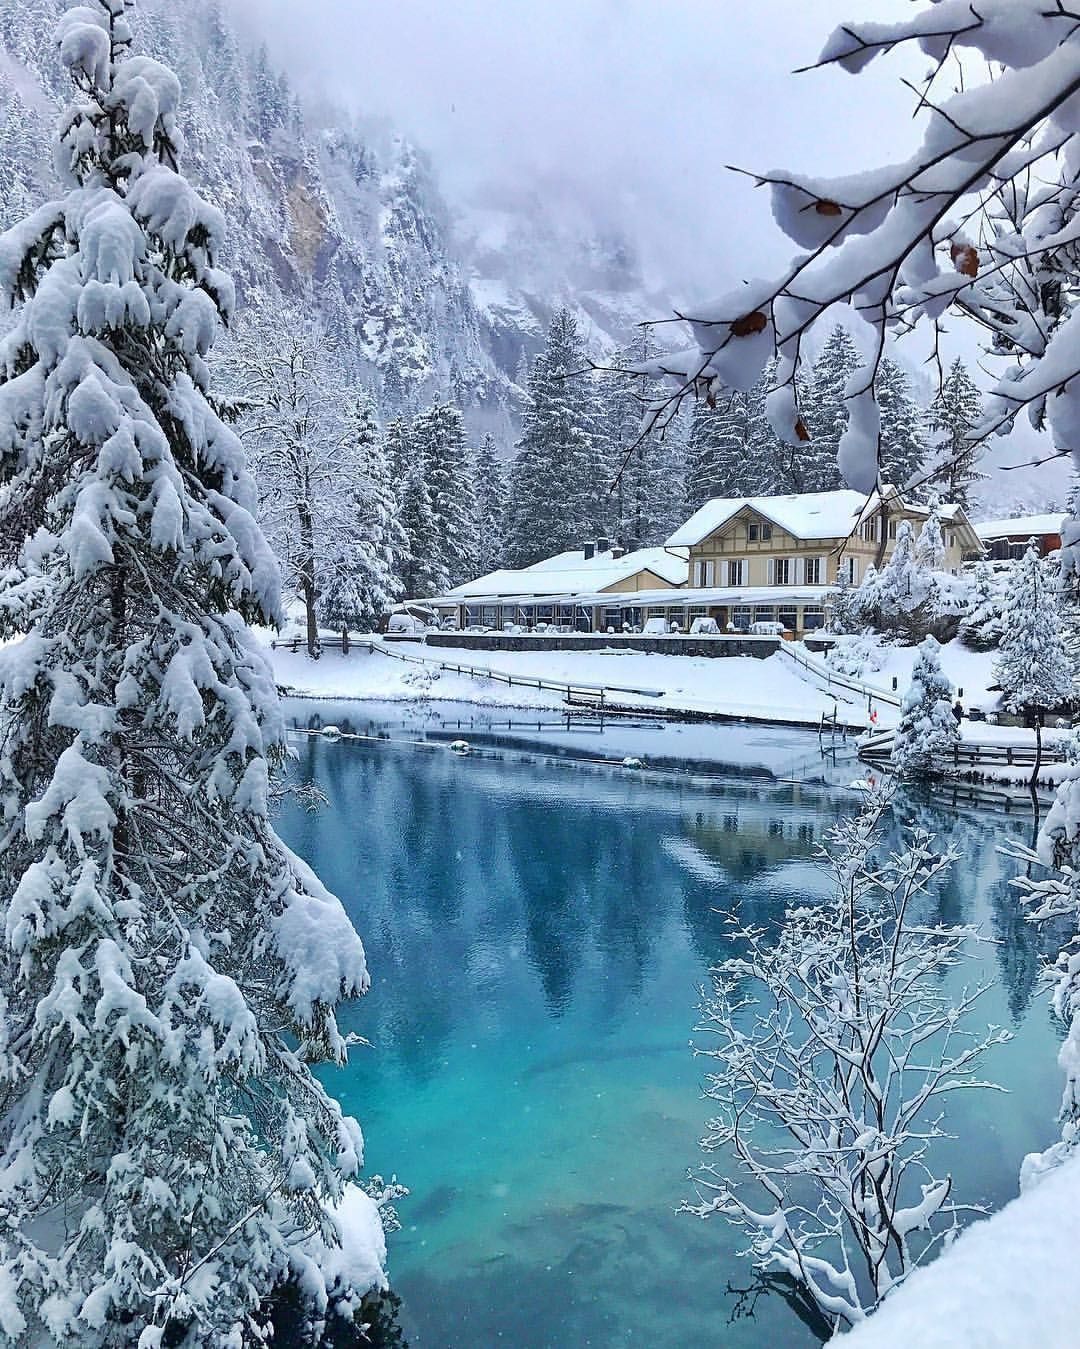 Blausee, Switzerland ? The place is so beautiful and surreal as